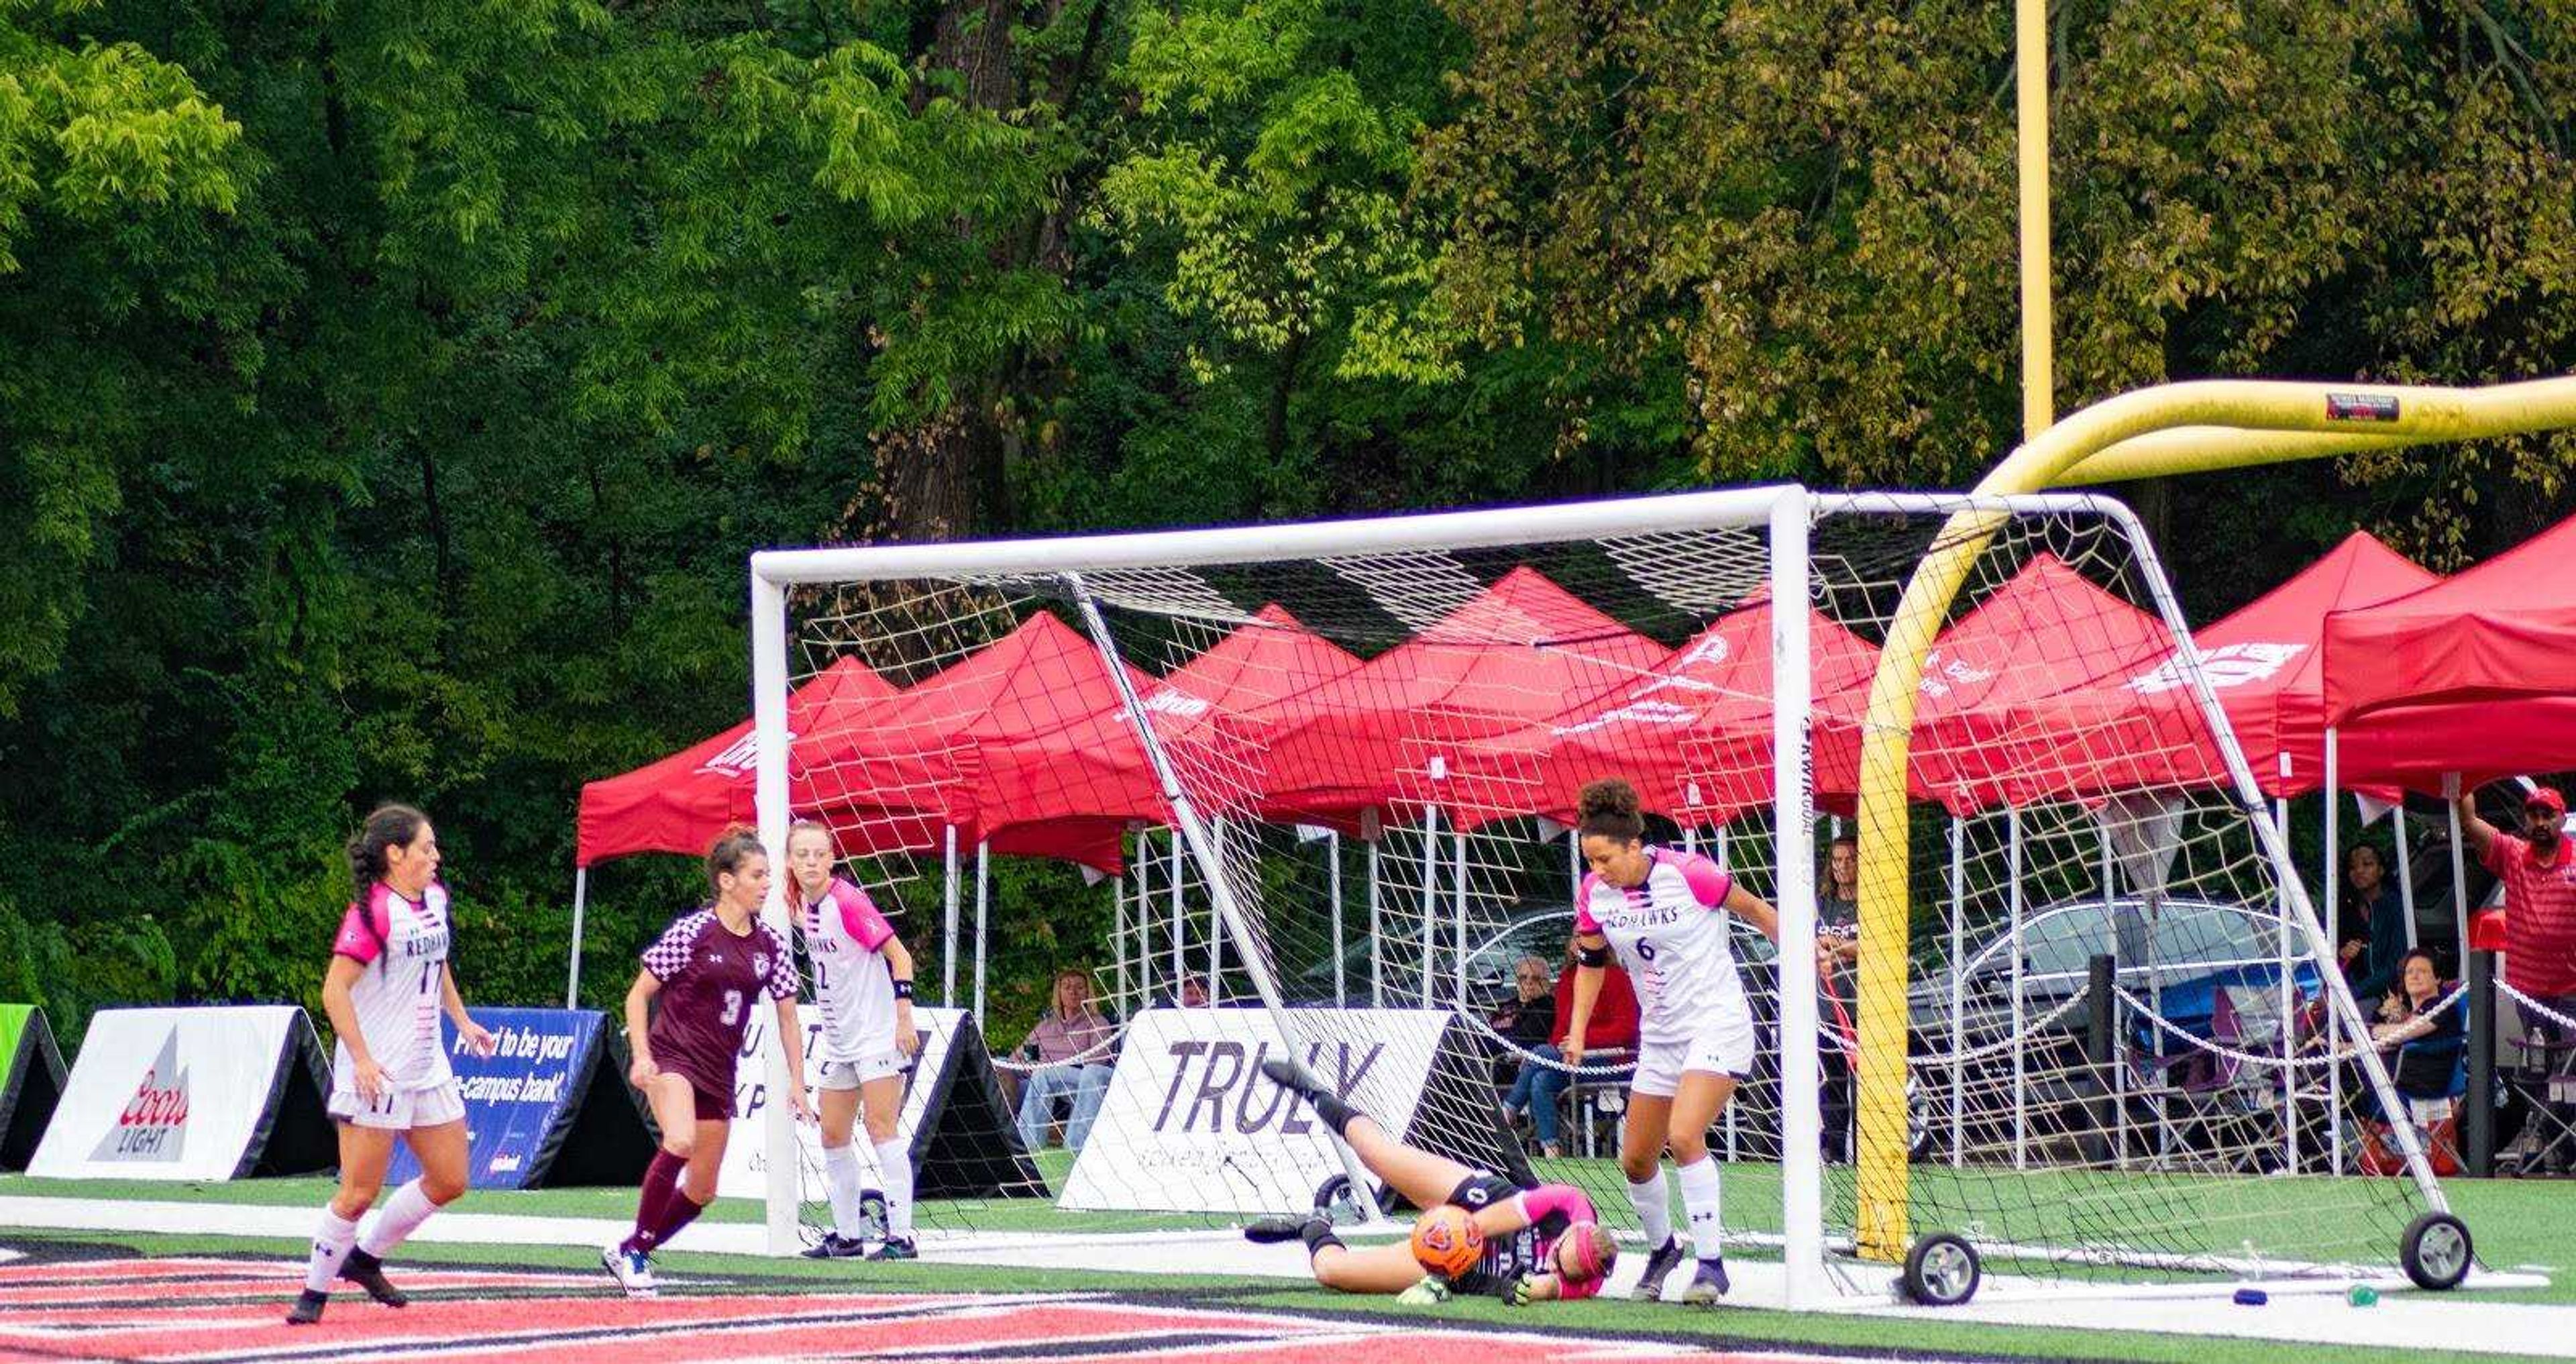 Sophomore goalkeeper Bailey Redden makes a diving stop against Southern Illinois on Oct. 6 at Houck Field. Redden shutout the Salukis 2-0 with four saves. The game marks her fourth shutout of the season.